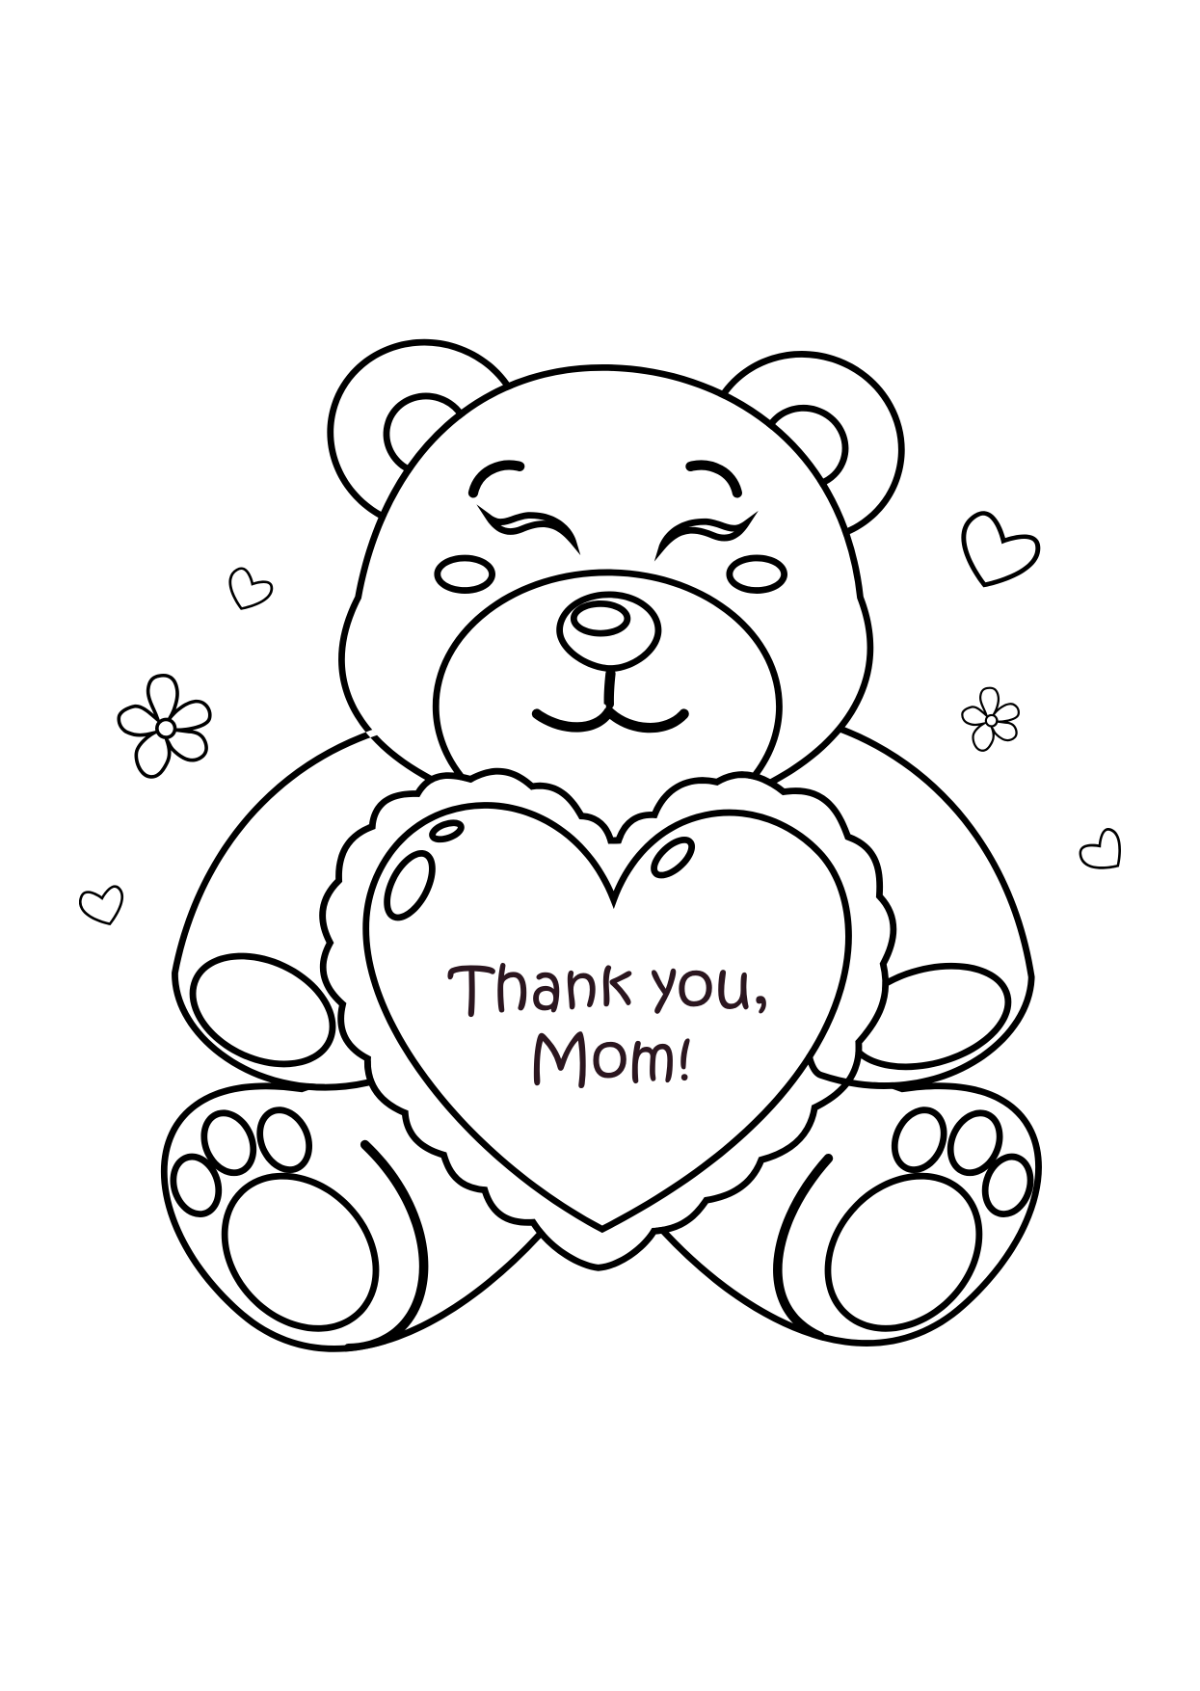 Mother's Day Teddy Bear Drawing Template